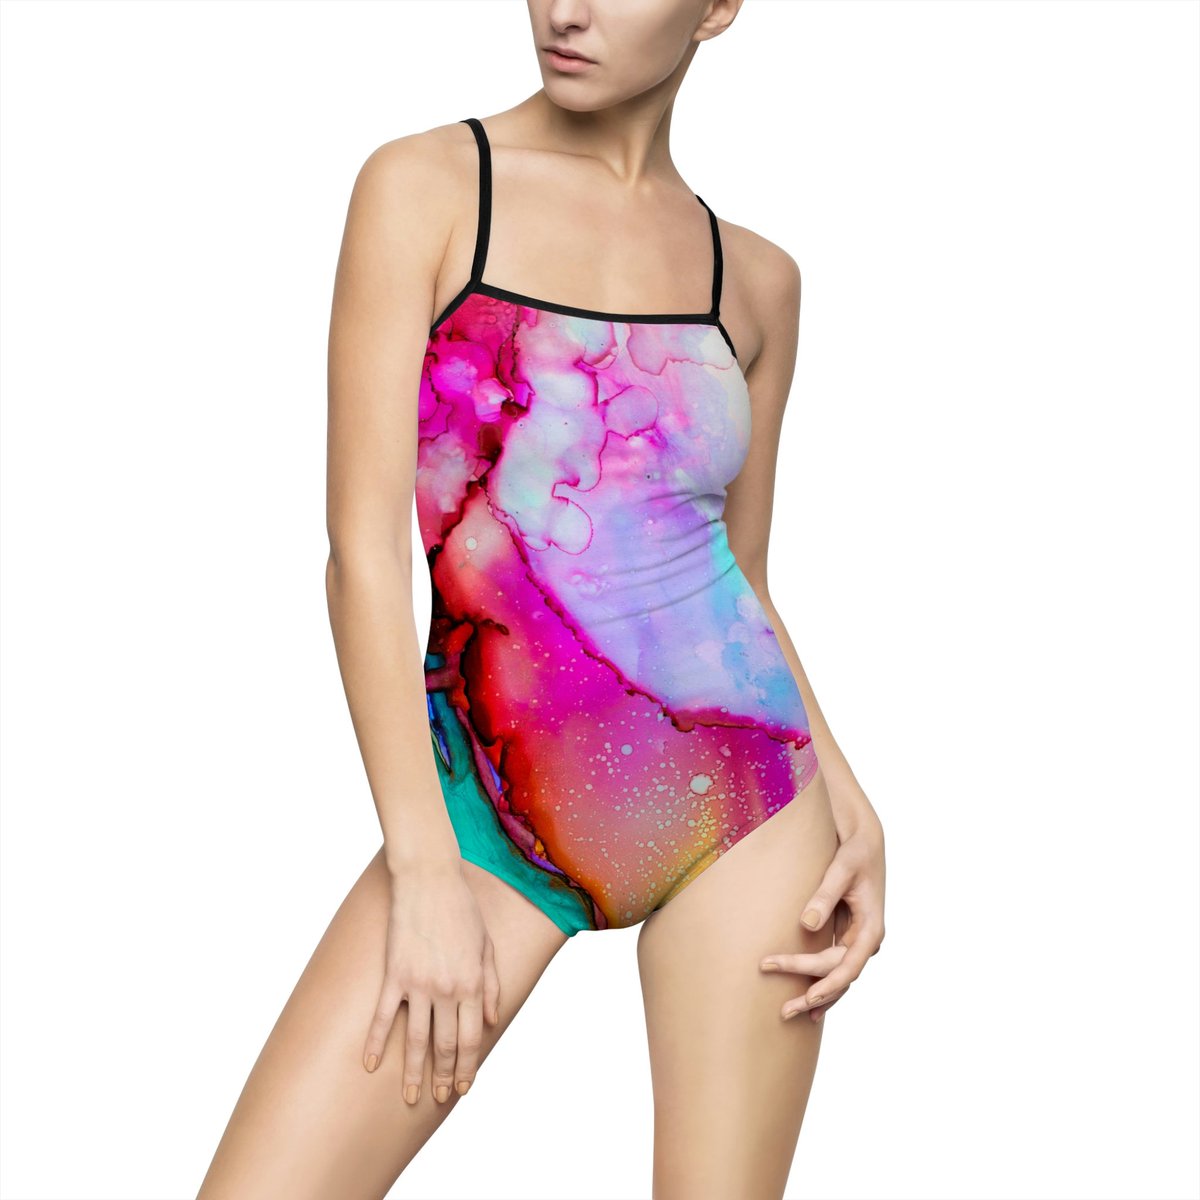 Excited to share the latest addition to my #etsy shop: Watercolor One Piece Swim Suit etsy.me/44zA7ww #swimming #swimwear #beachwear #poolwear #forher #summergift #colorfulswimwear #onepiecesuit #bathingsuit